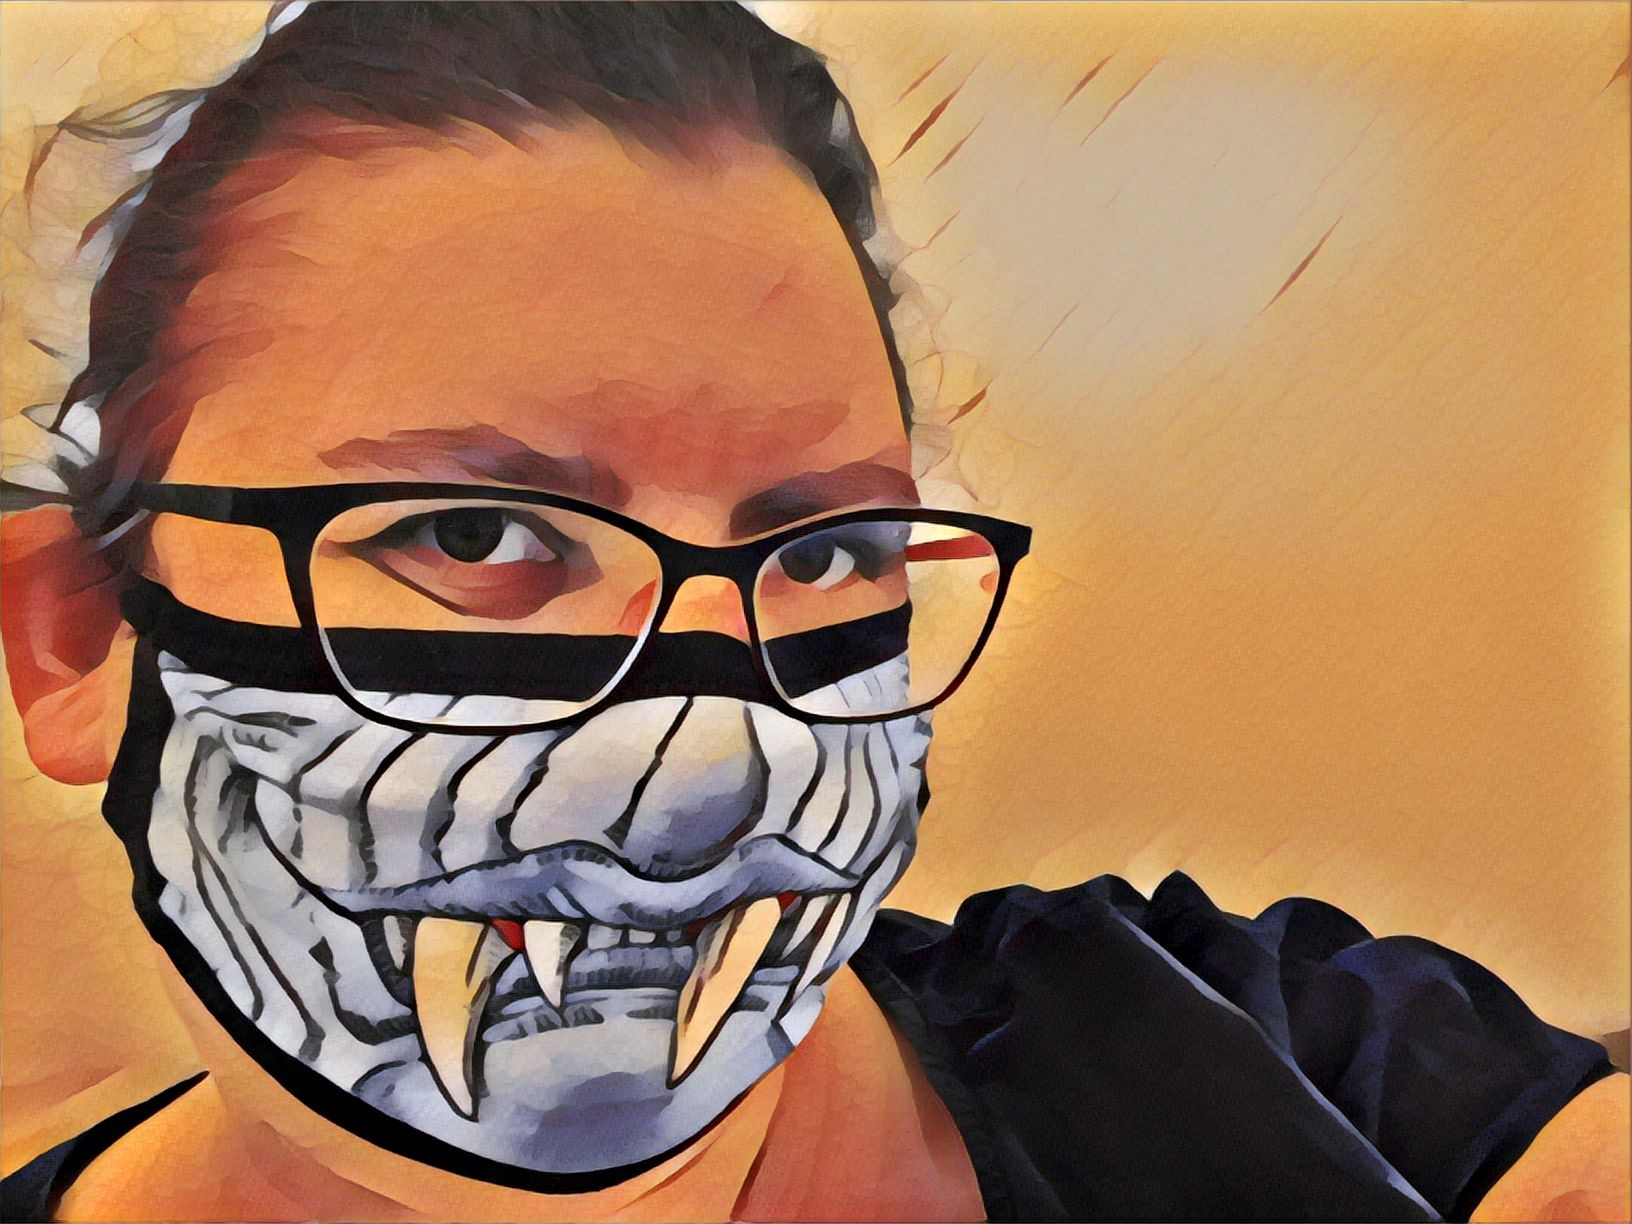 Picture of the head of a woman with hair tied back, wearing glasses and a mask with an ogre face on it.